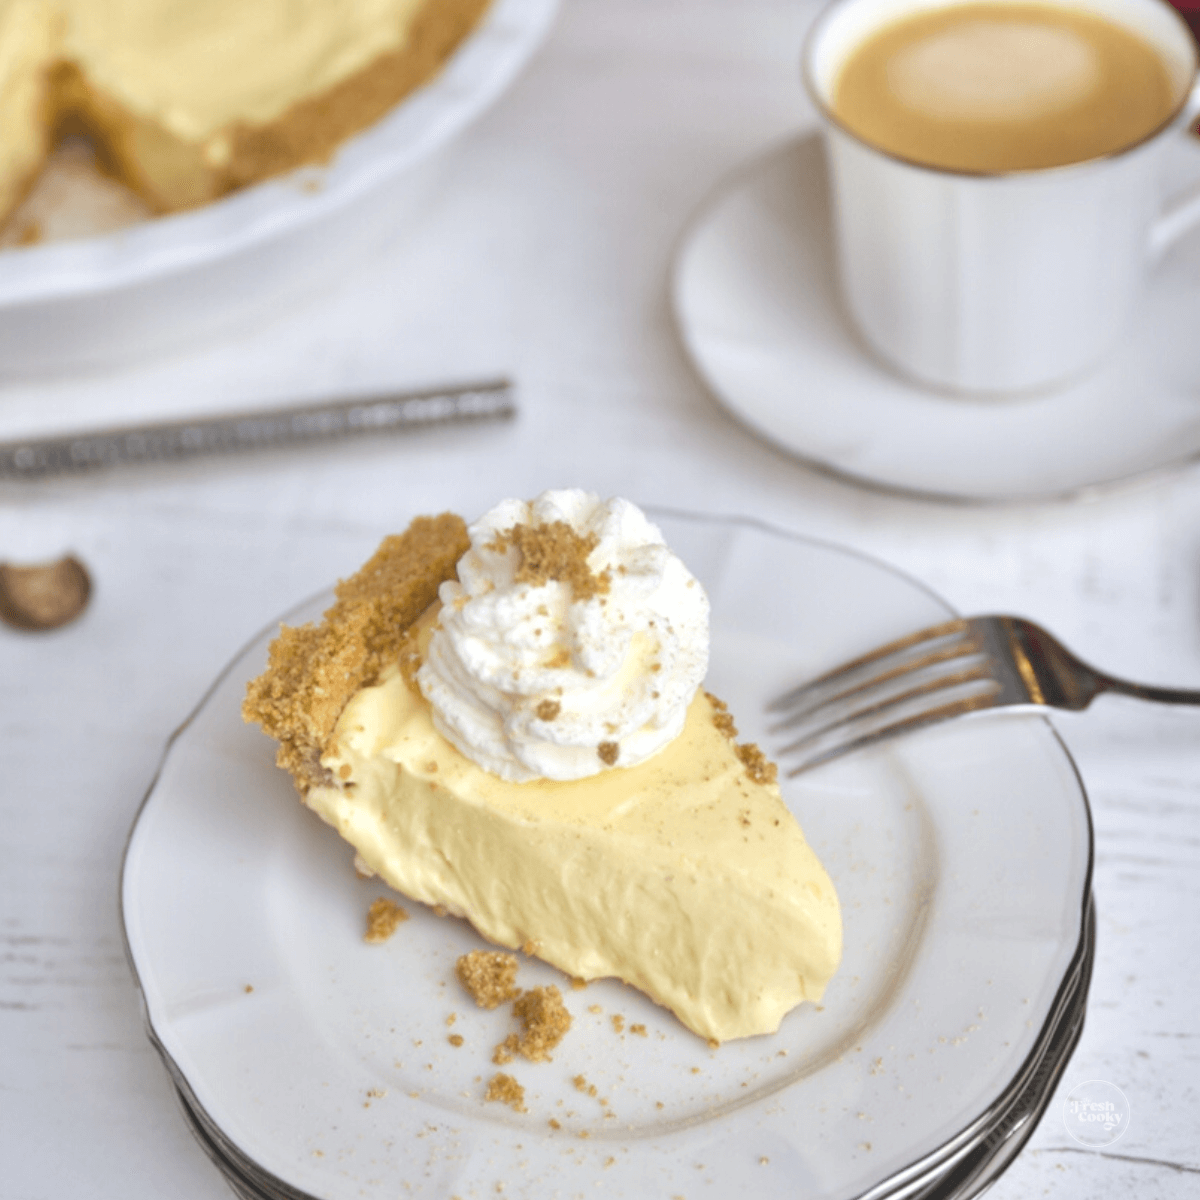 Slice of no bake eggnog pie on plate and topped with whipped cream with coffee in background.